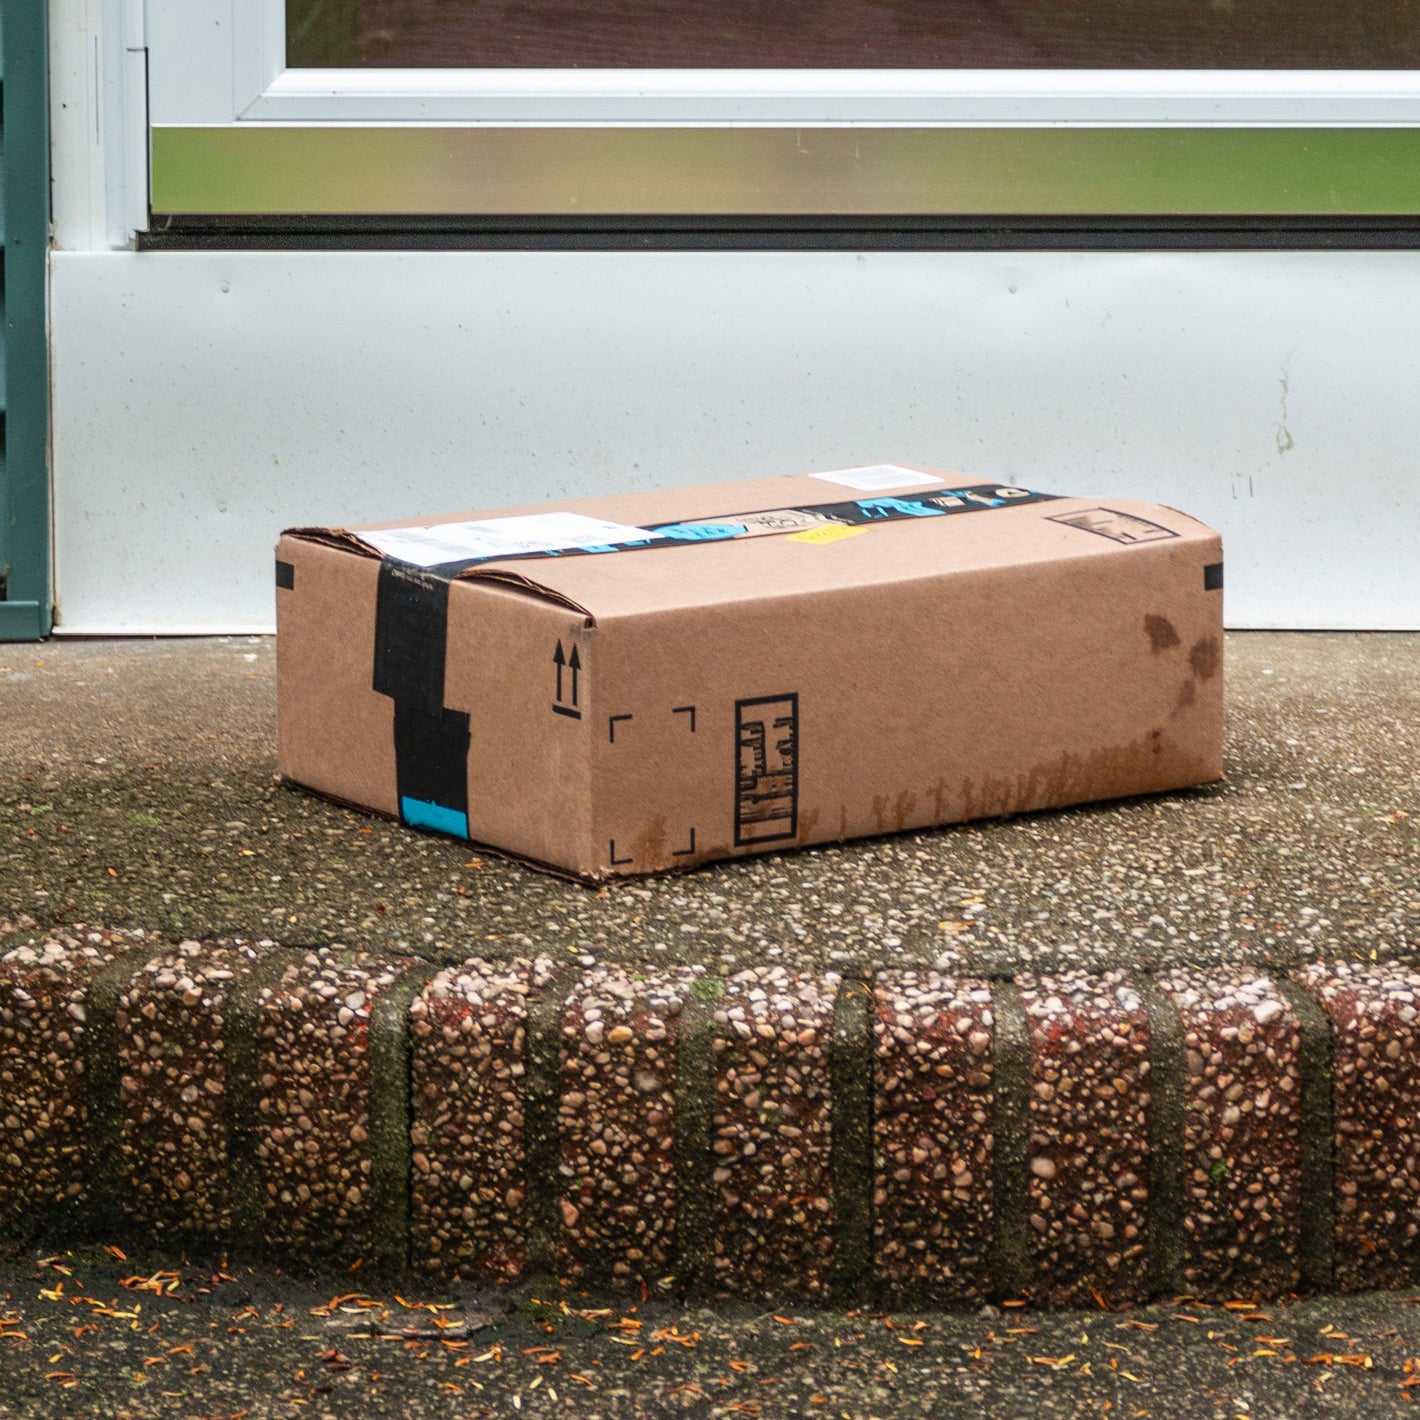 Package on a wet step area by the front door